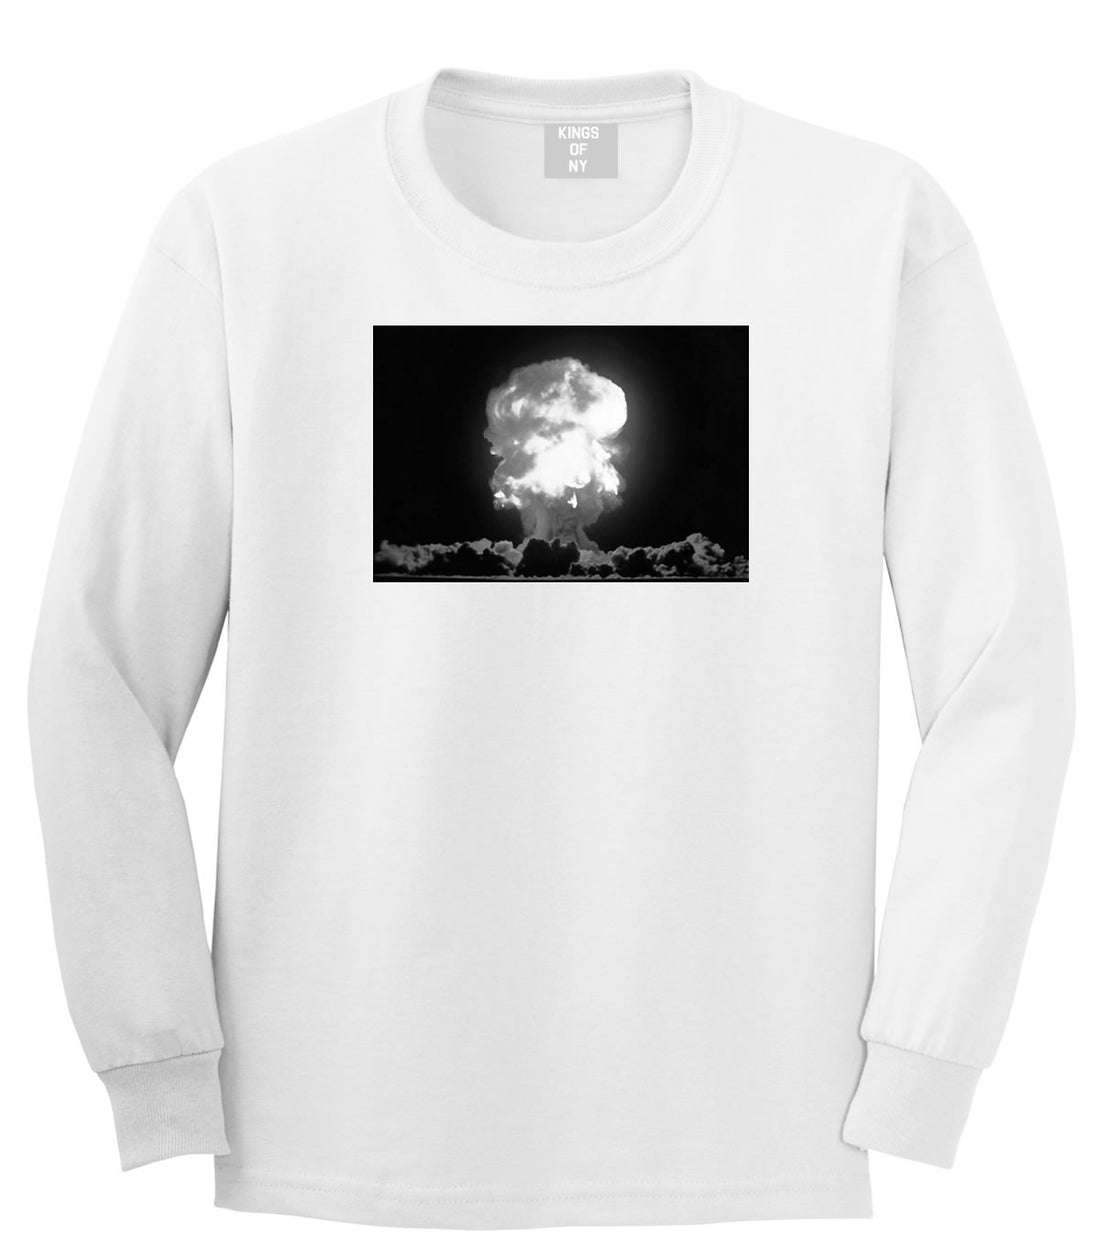 Explosion Nuclear Bomb Cloud Long Sleeve T-Shirt in White By Kings Of NY